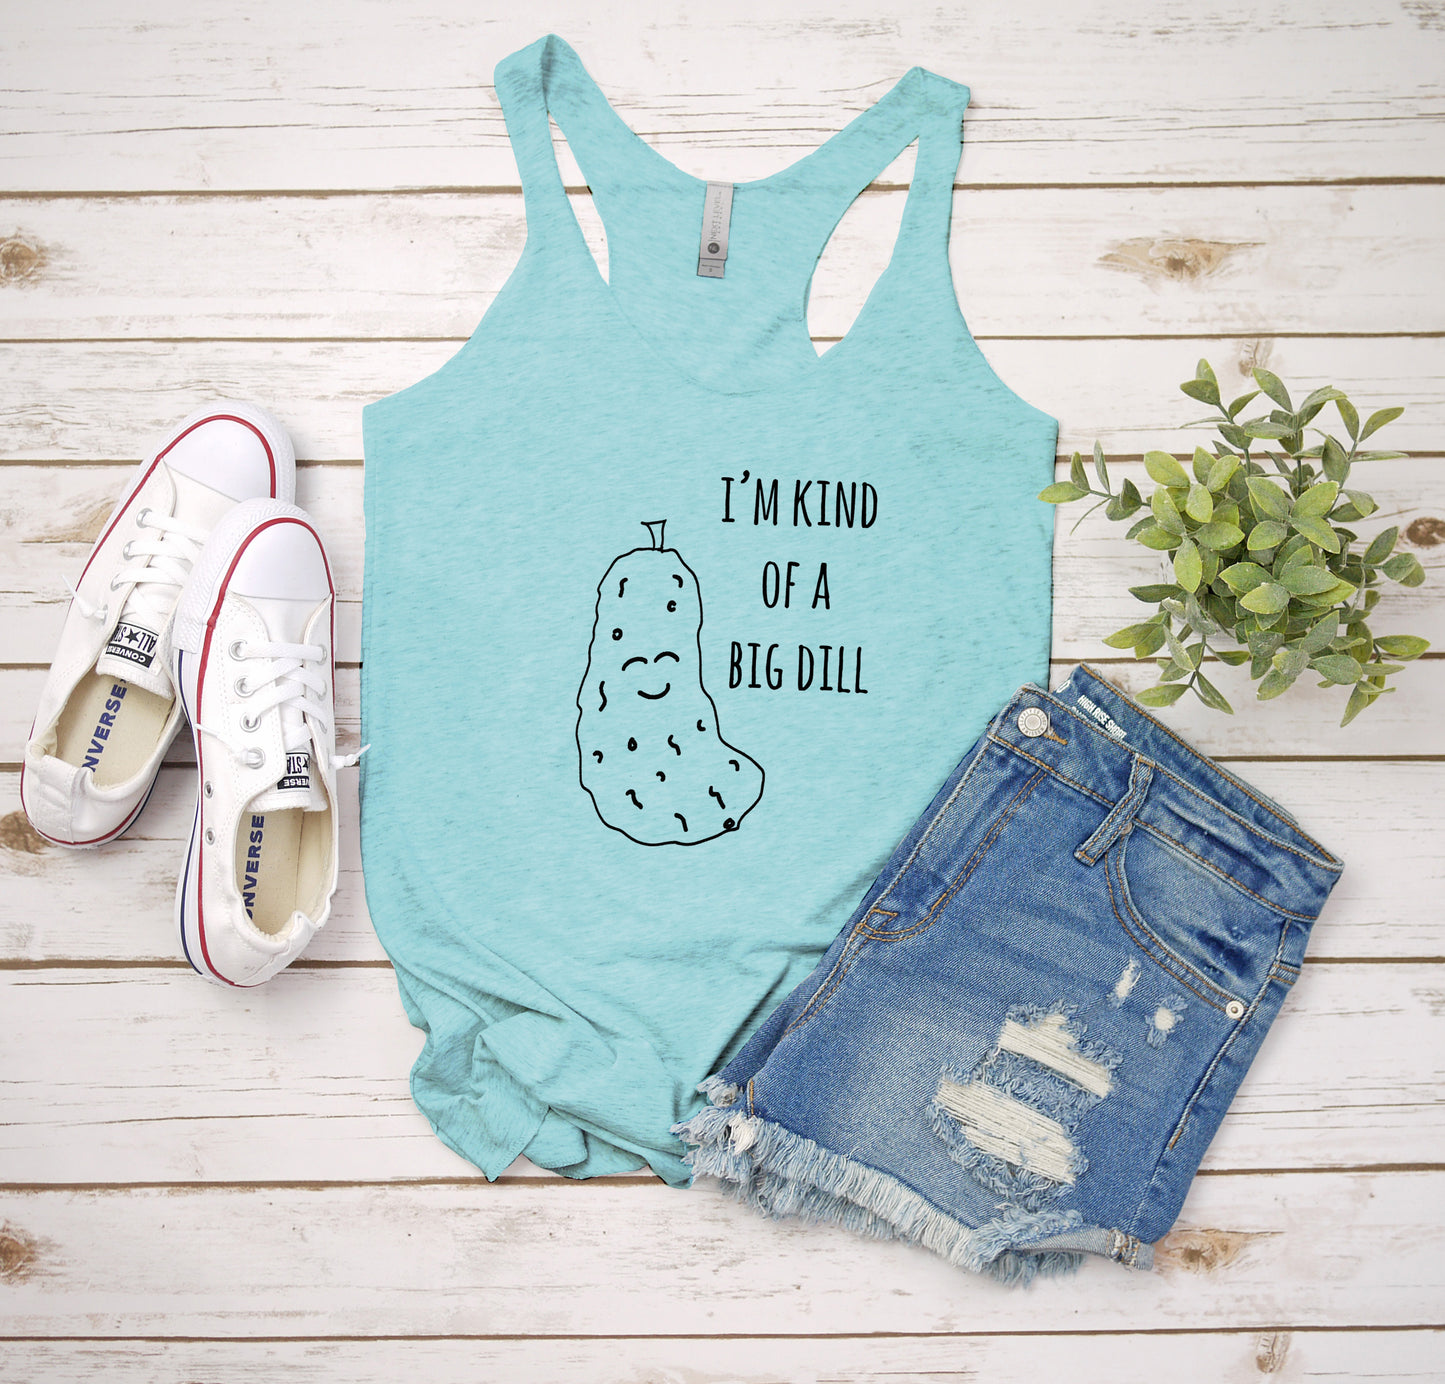 I'm Kind Of A Big Dill (Pickle) - Women's Tank - Heather Gray, Tahiti, or Envy